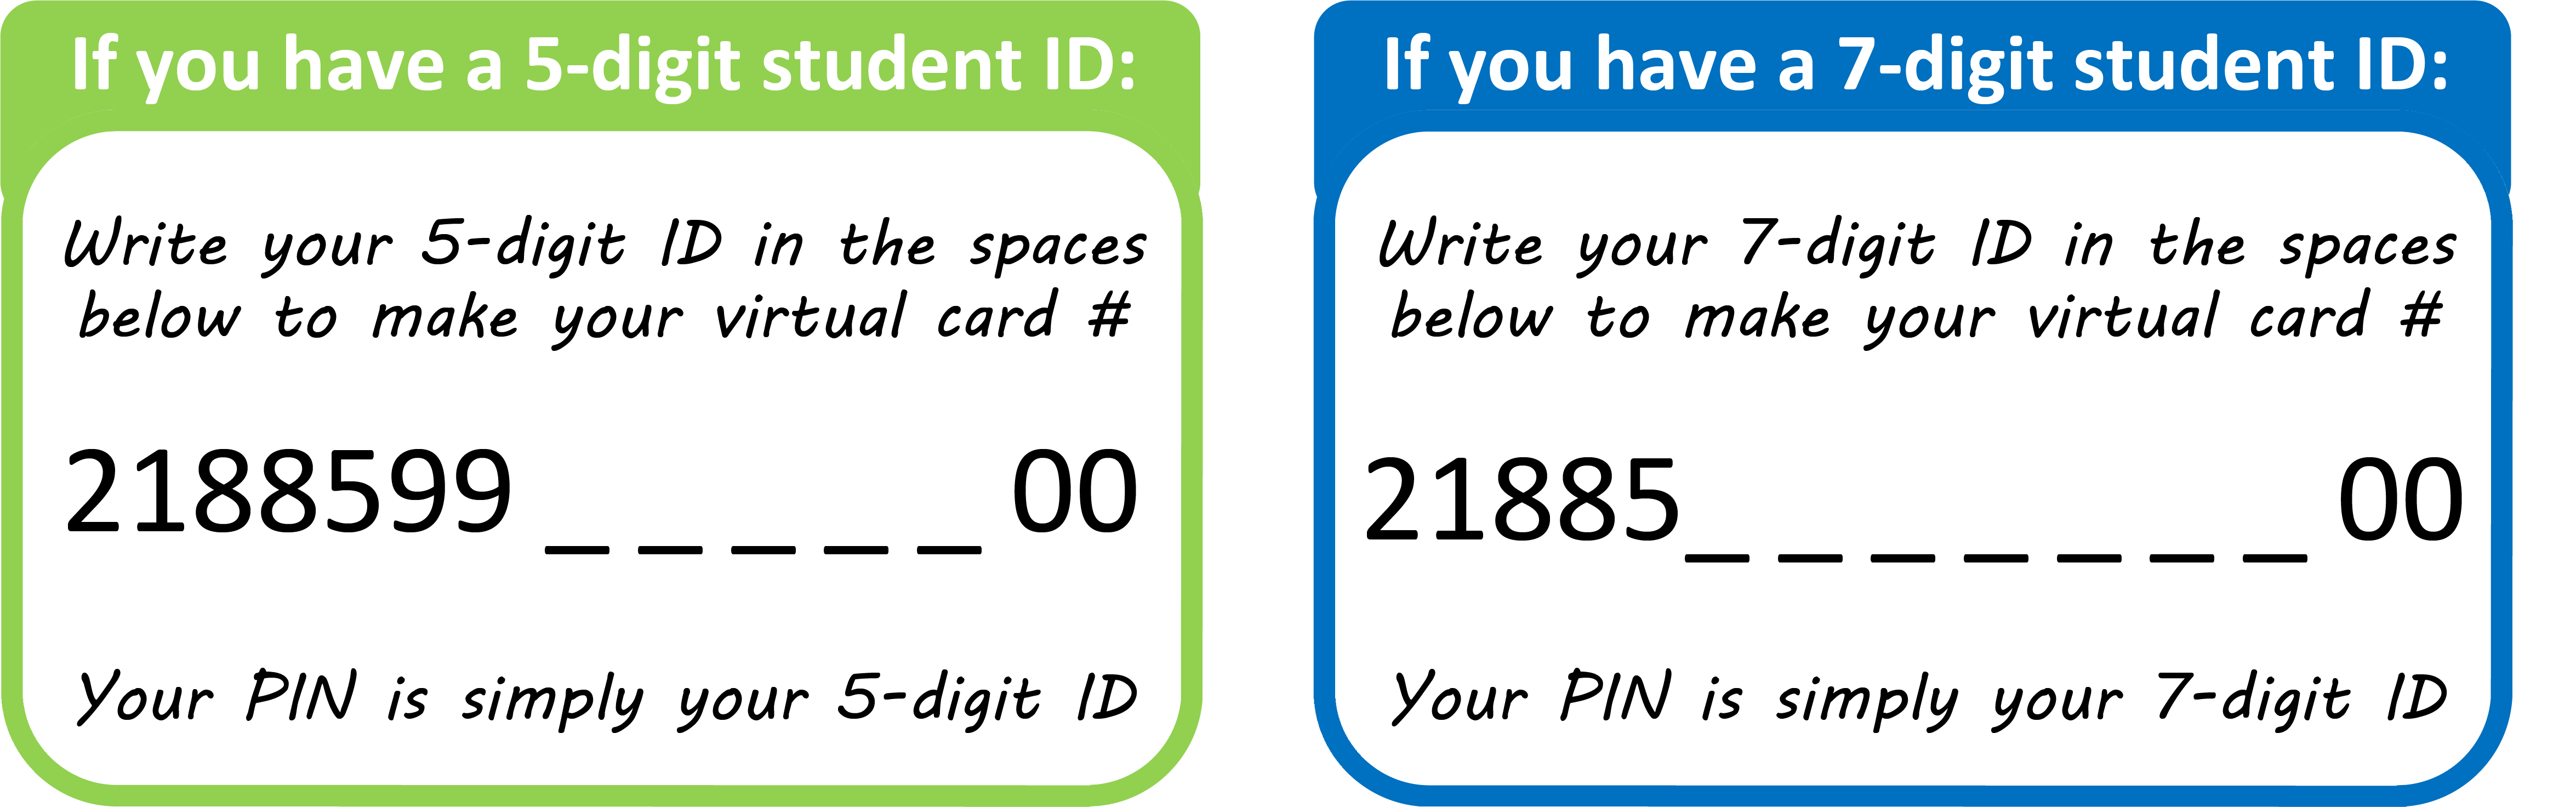 SVLC how to graphic: "If you have a 5-digit student ID: Write your 5-digit ID in the spaces below to make your virtual card #. Your PIN is simply your 5-digit ID. If you have a 7-digit student ID: Write your 7-digit ID in the spaces below to make your virtual card #. Your PIN is simply your 7-digit ID"